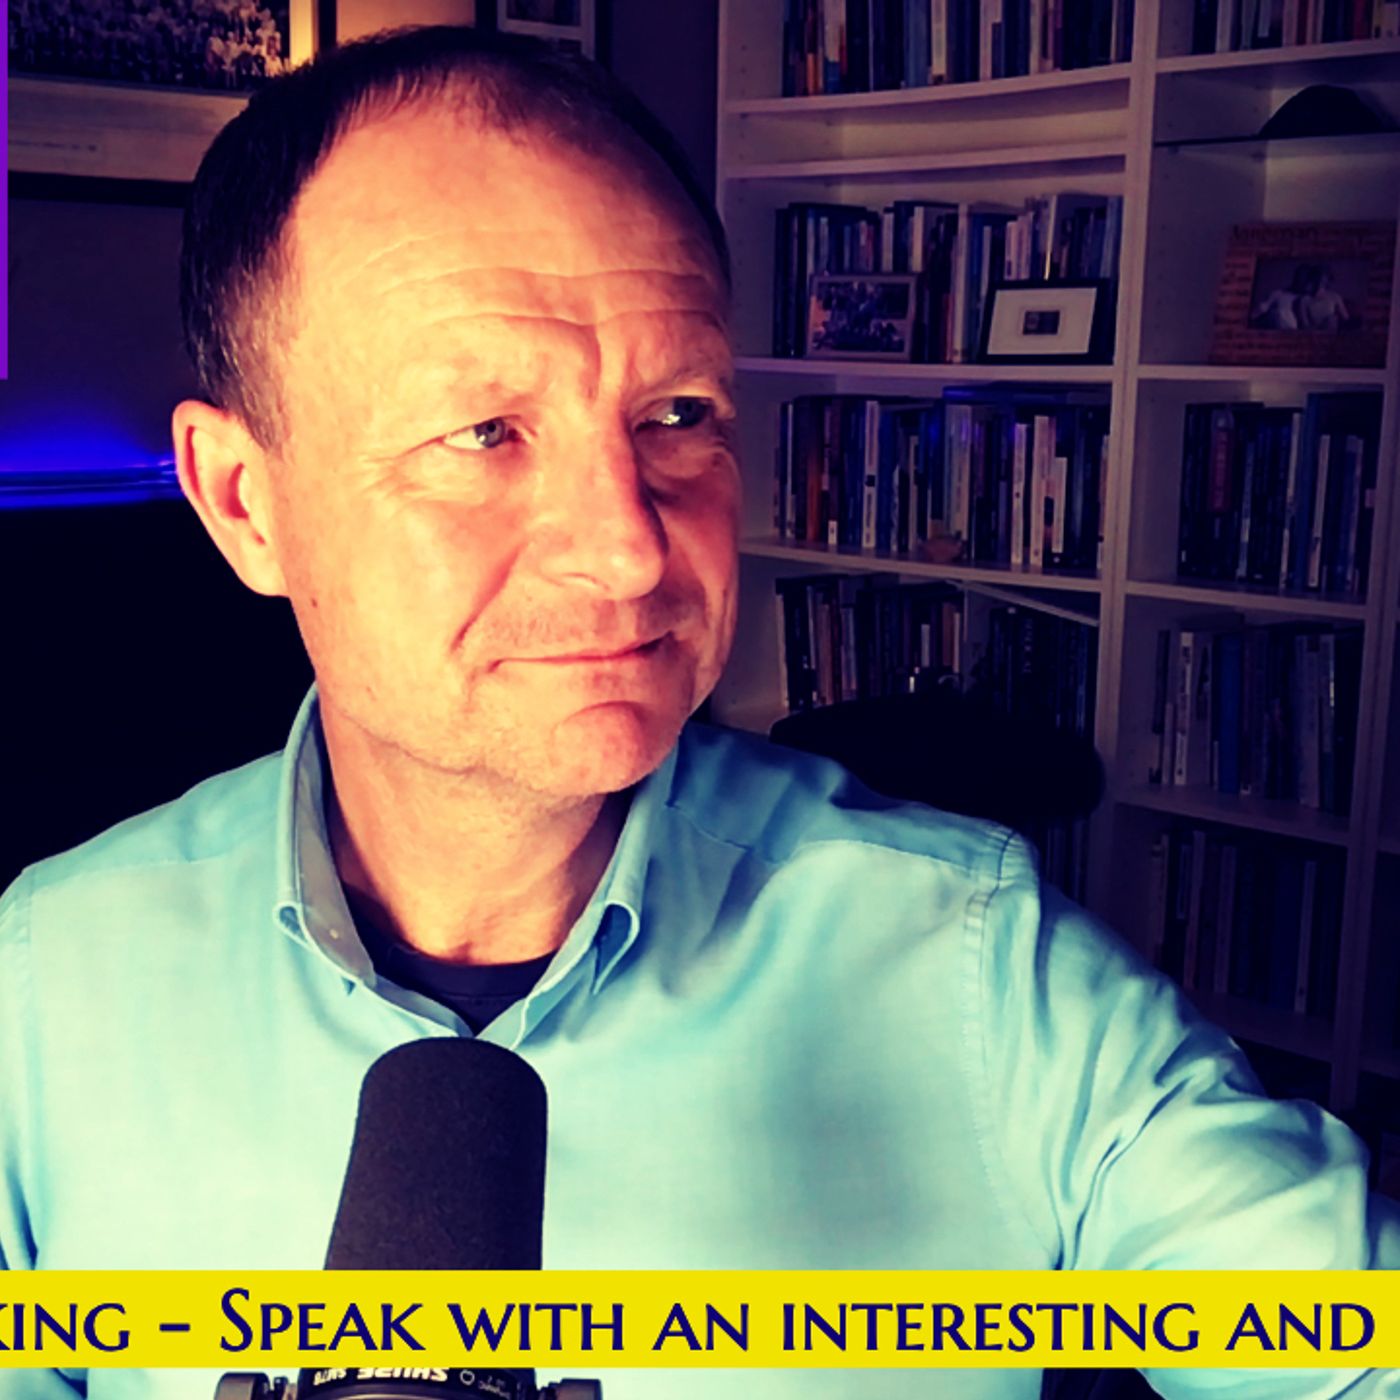 S2 Ep2189: Teaching Tip 361 | “Plain Speaking - Speak With an Interesting and Clear Voice” | Malcolm Cox